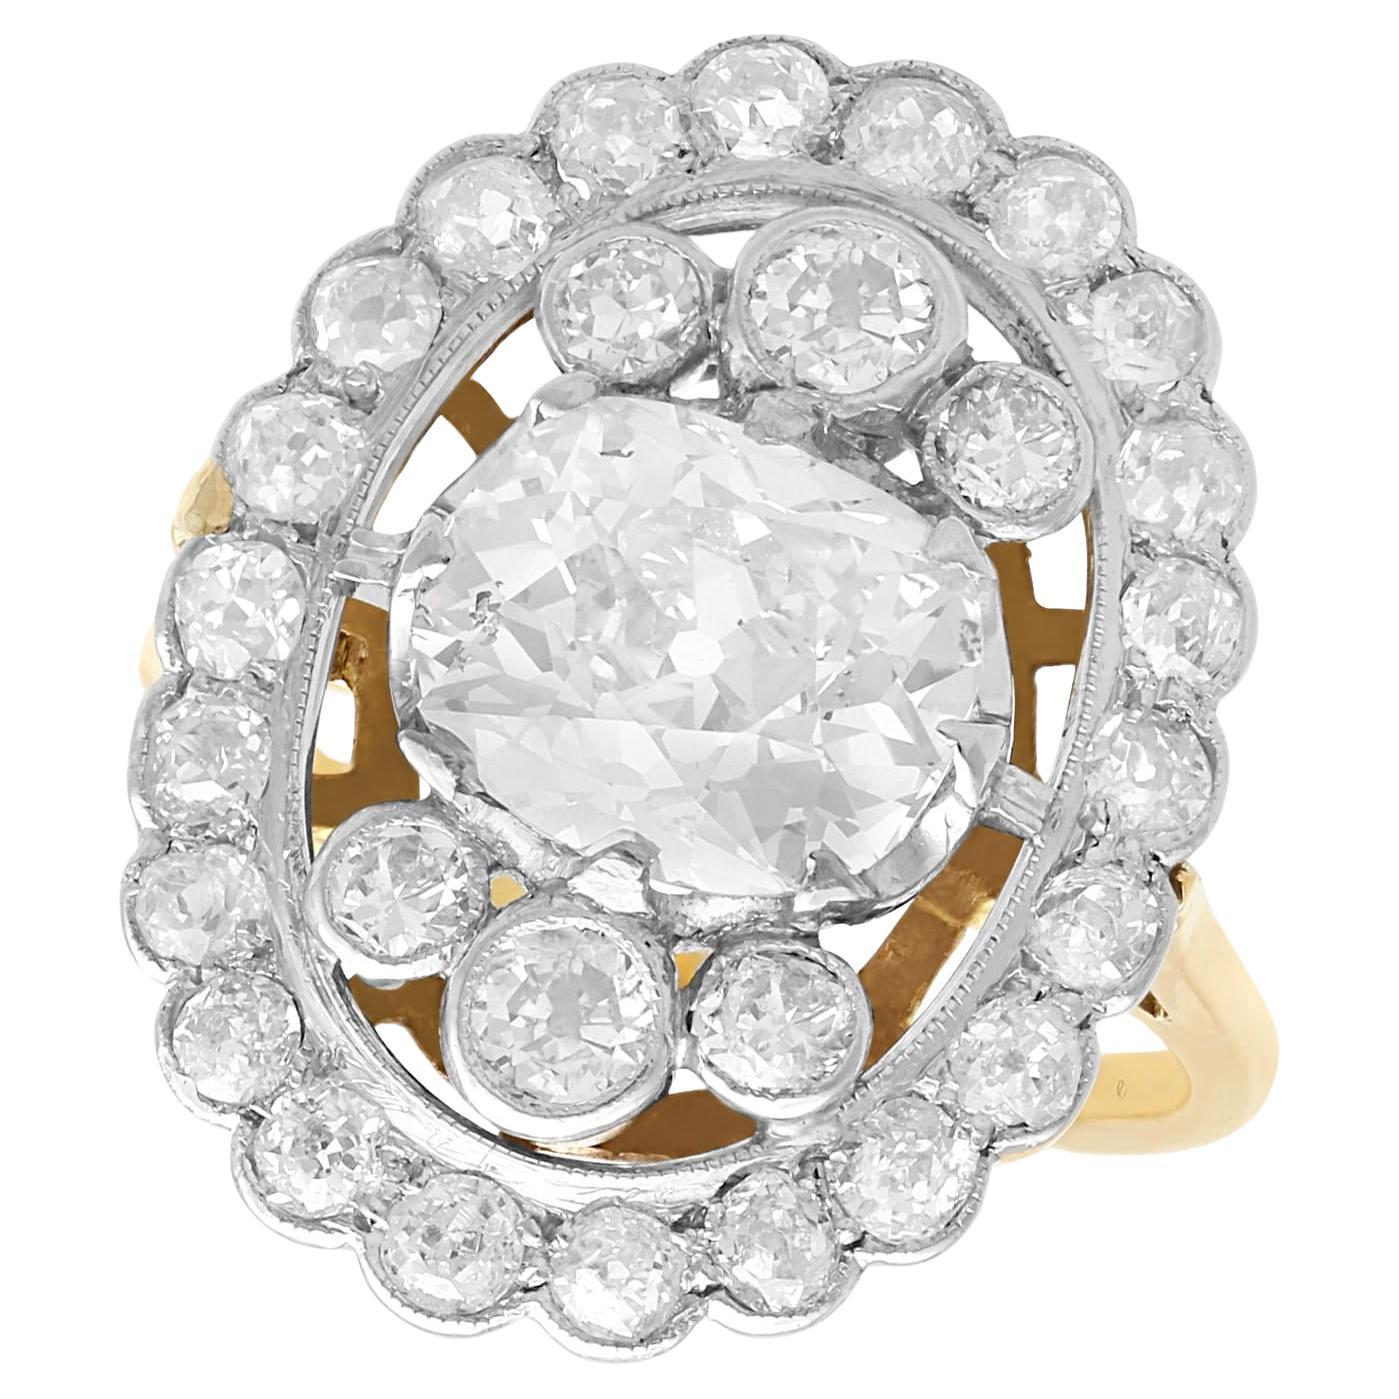 Antique 3.98Ct Diamond and 18k Yellow Gold Cluster Ring Circa 1925